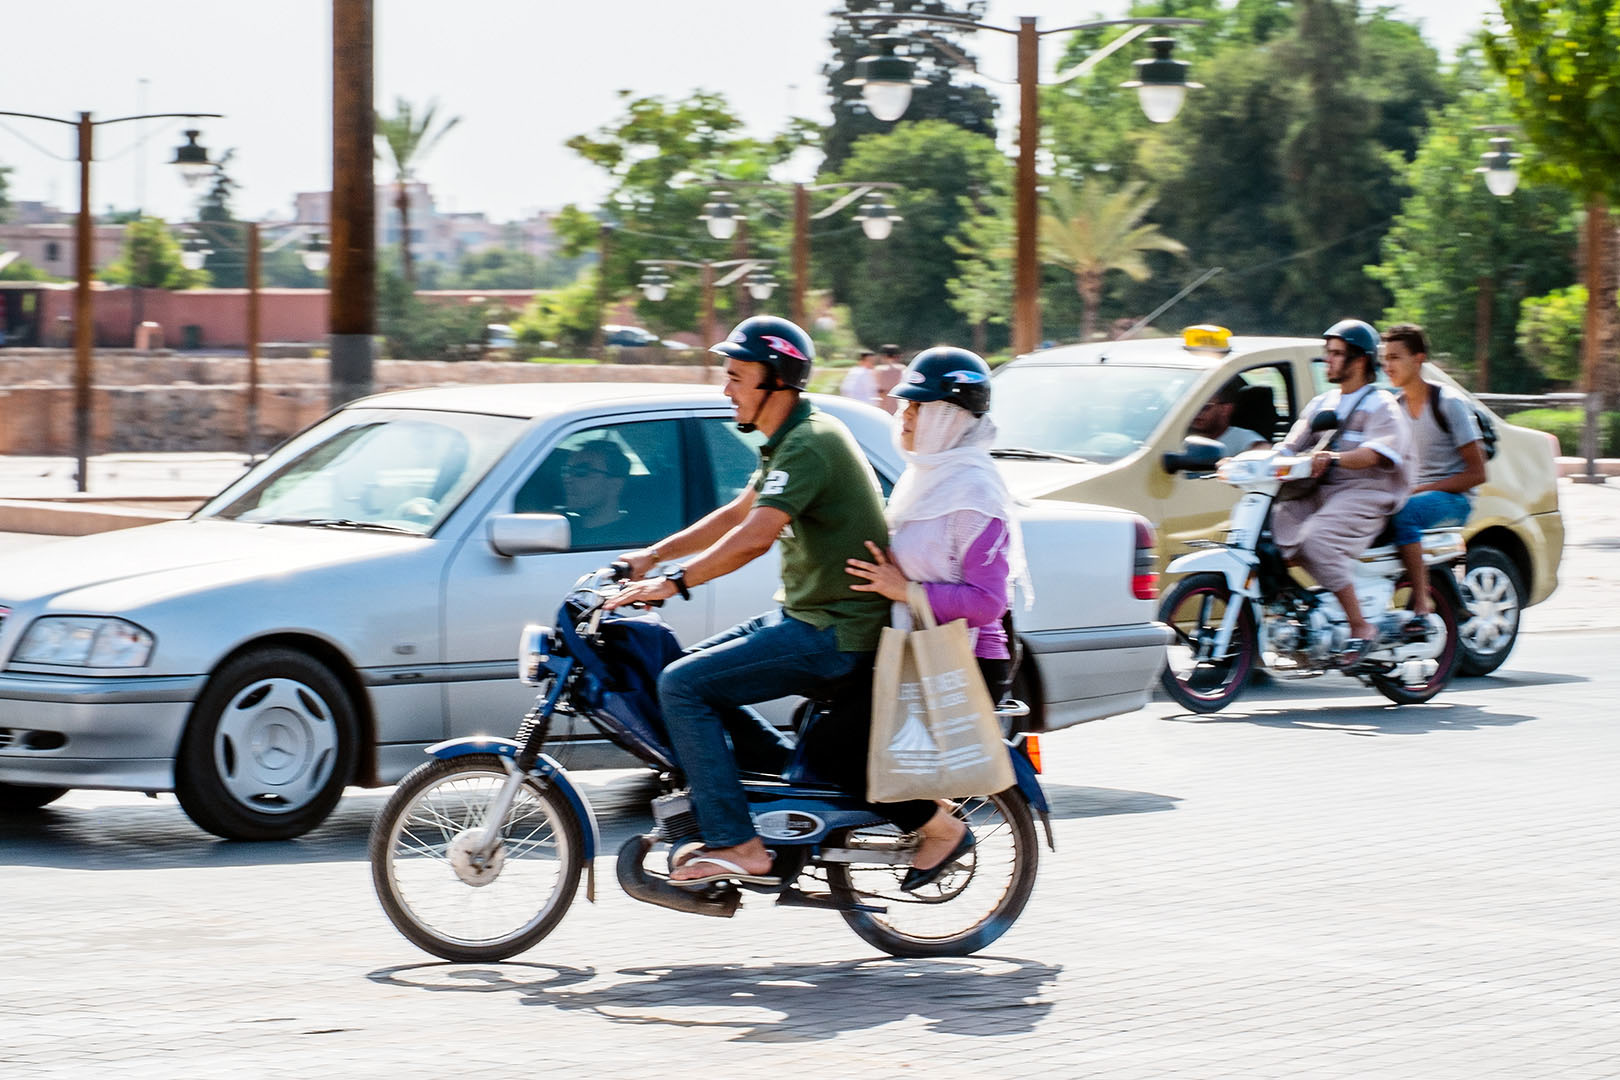 Two scooters with passengers in motion amongst traffic on Marrakech street